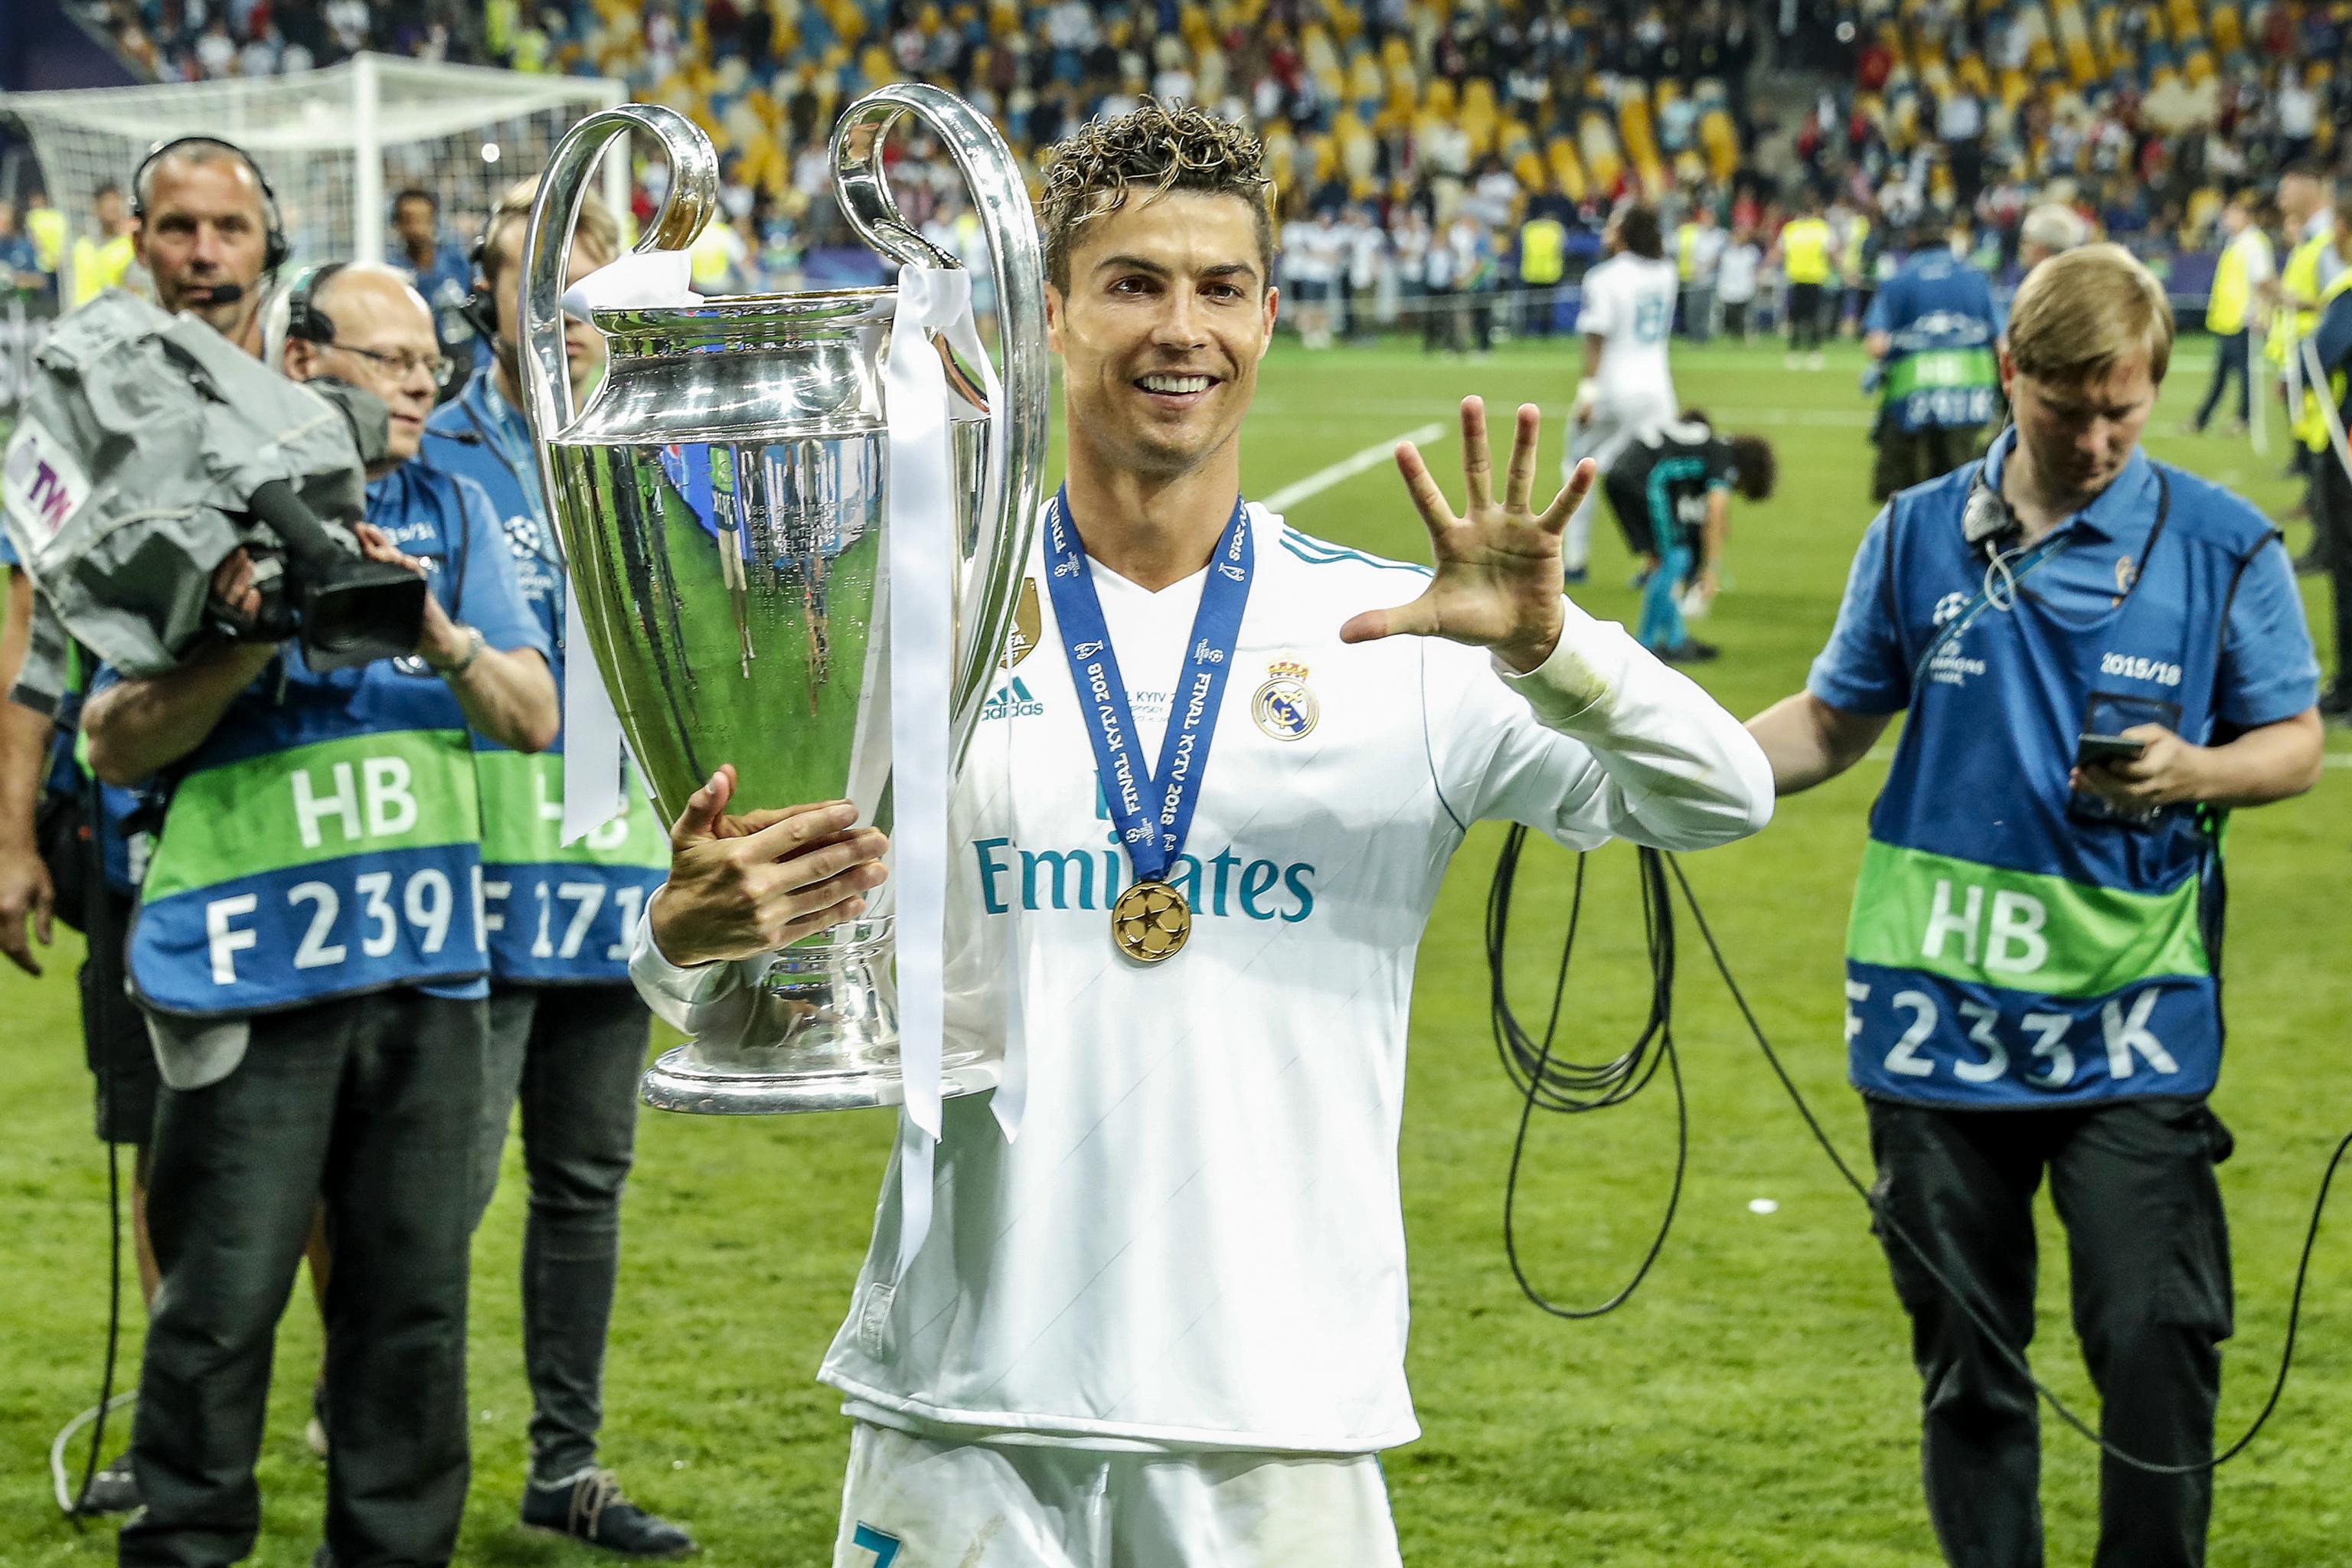 18 19 Champions League Odds Released After Cristiano Ronaldo S Transfer Bleacher Report Latest News Videos And Highlights